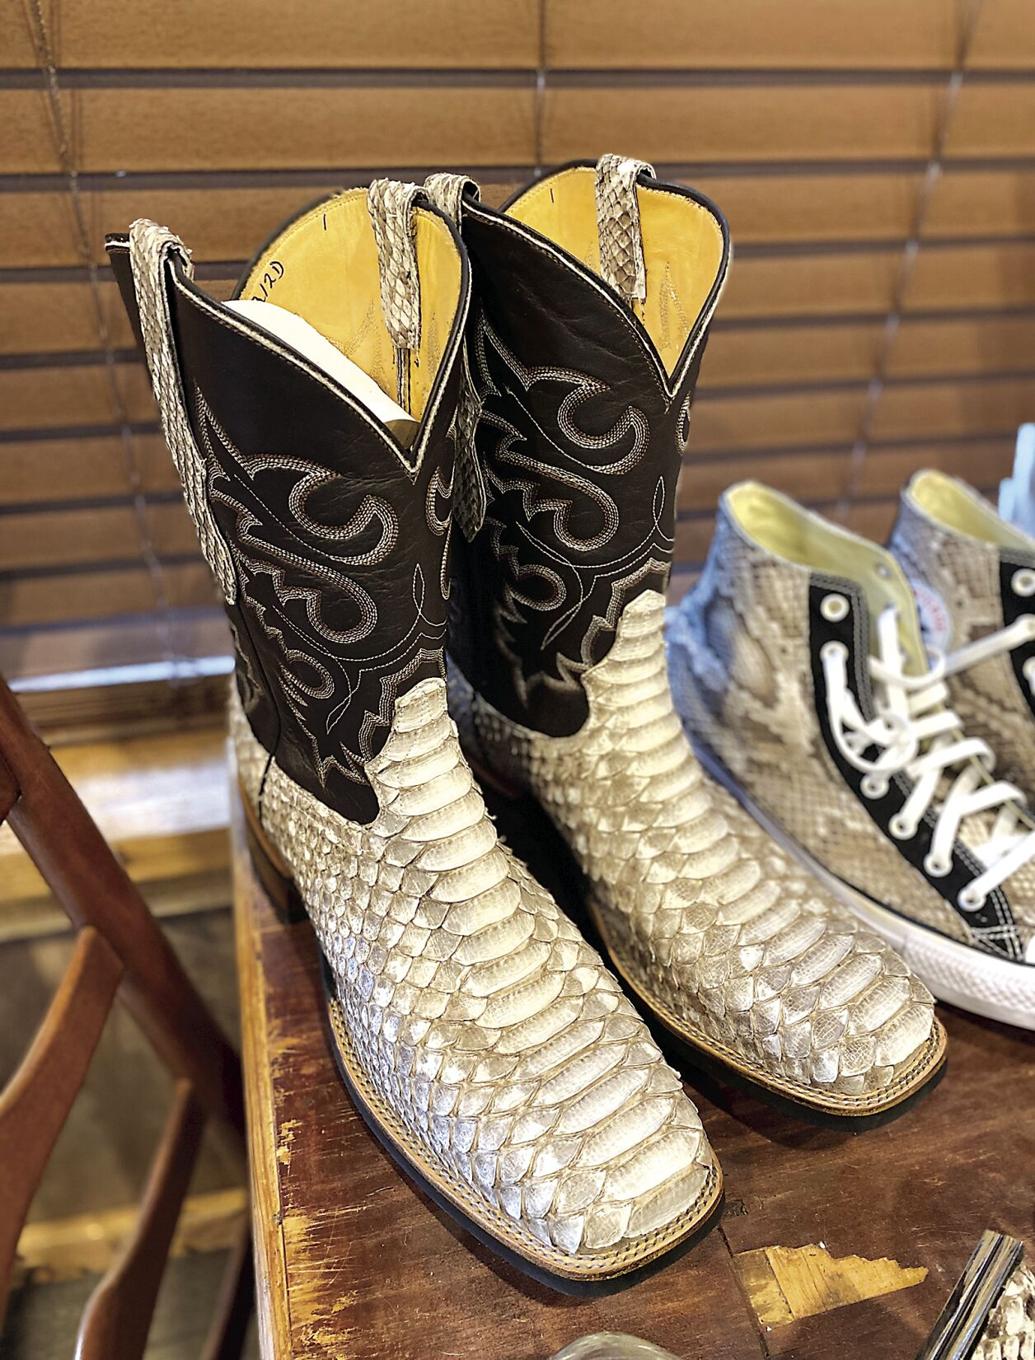 “Wildman” Dusty Crum Makes Specialty Items from Snakeskin | Lifestyles ...